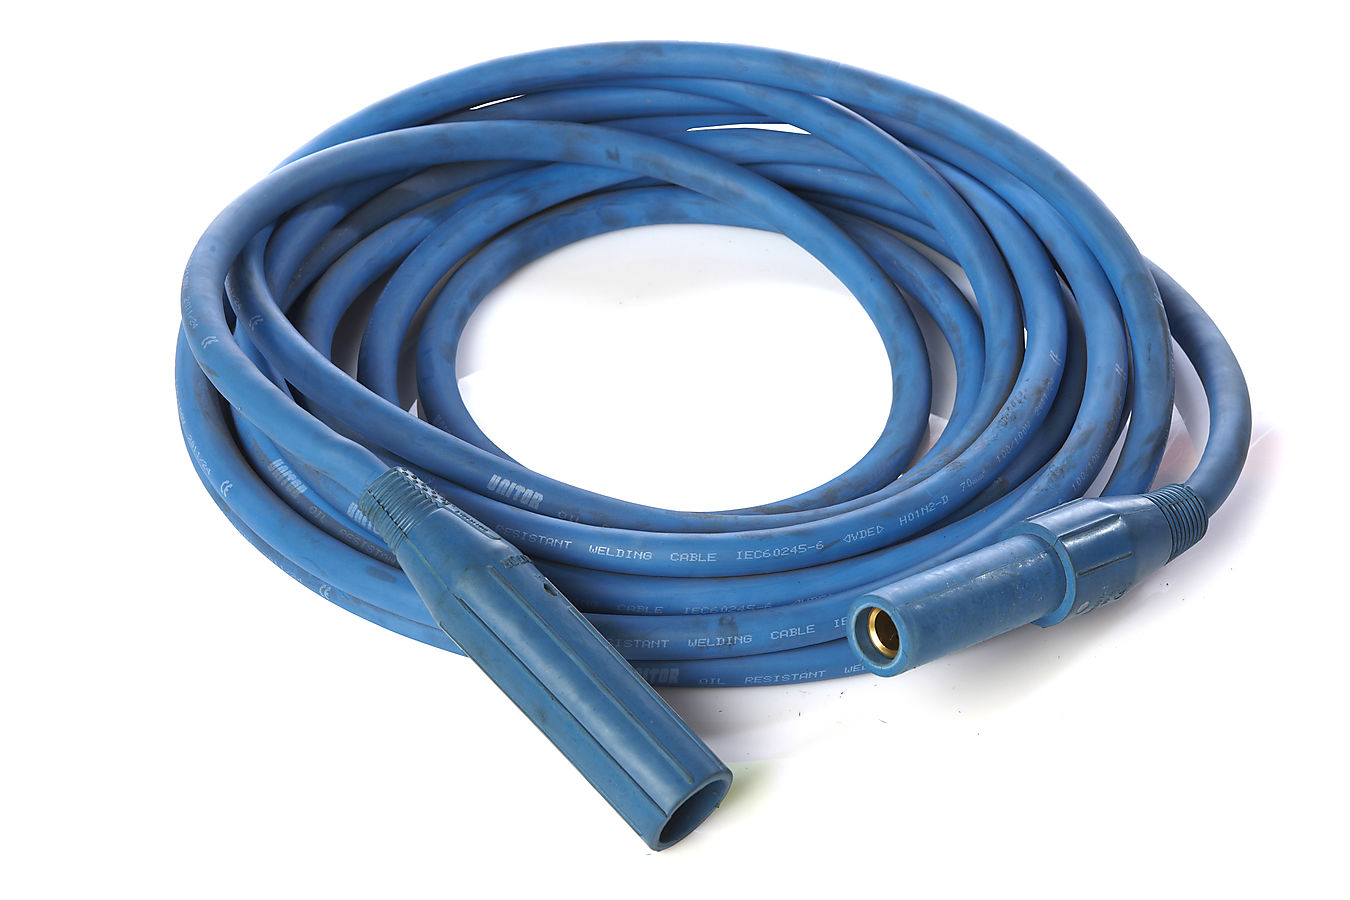 95mm WELDING CABLE AND CONNECTOR SUPPLIER IN ABU DHABI UAE rigstore.ae